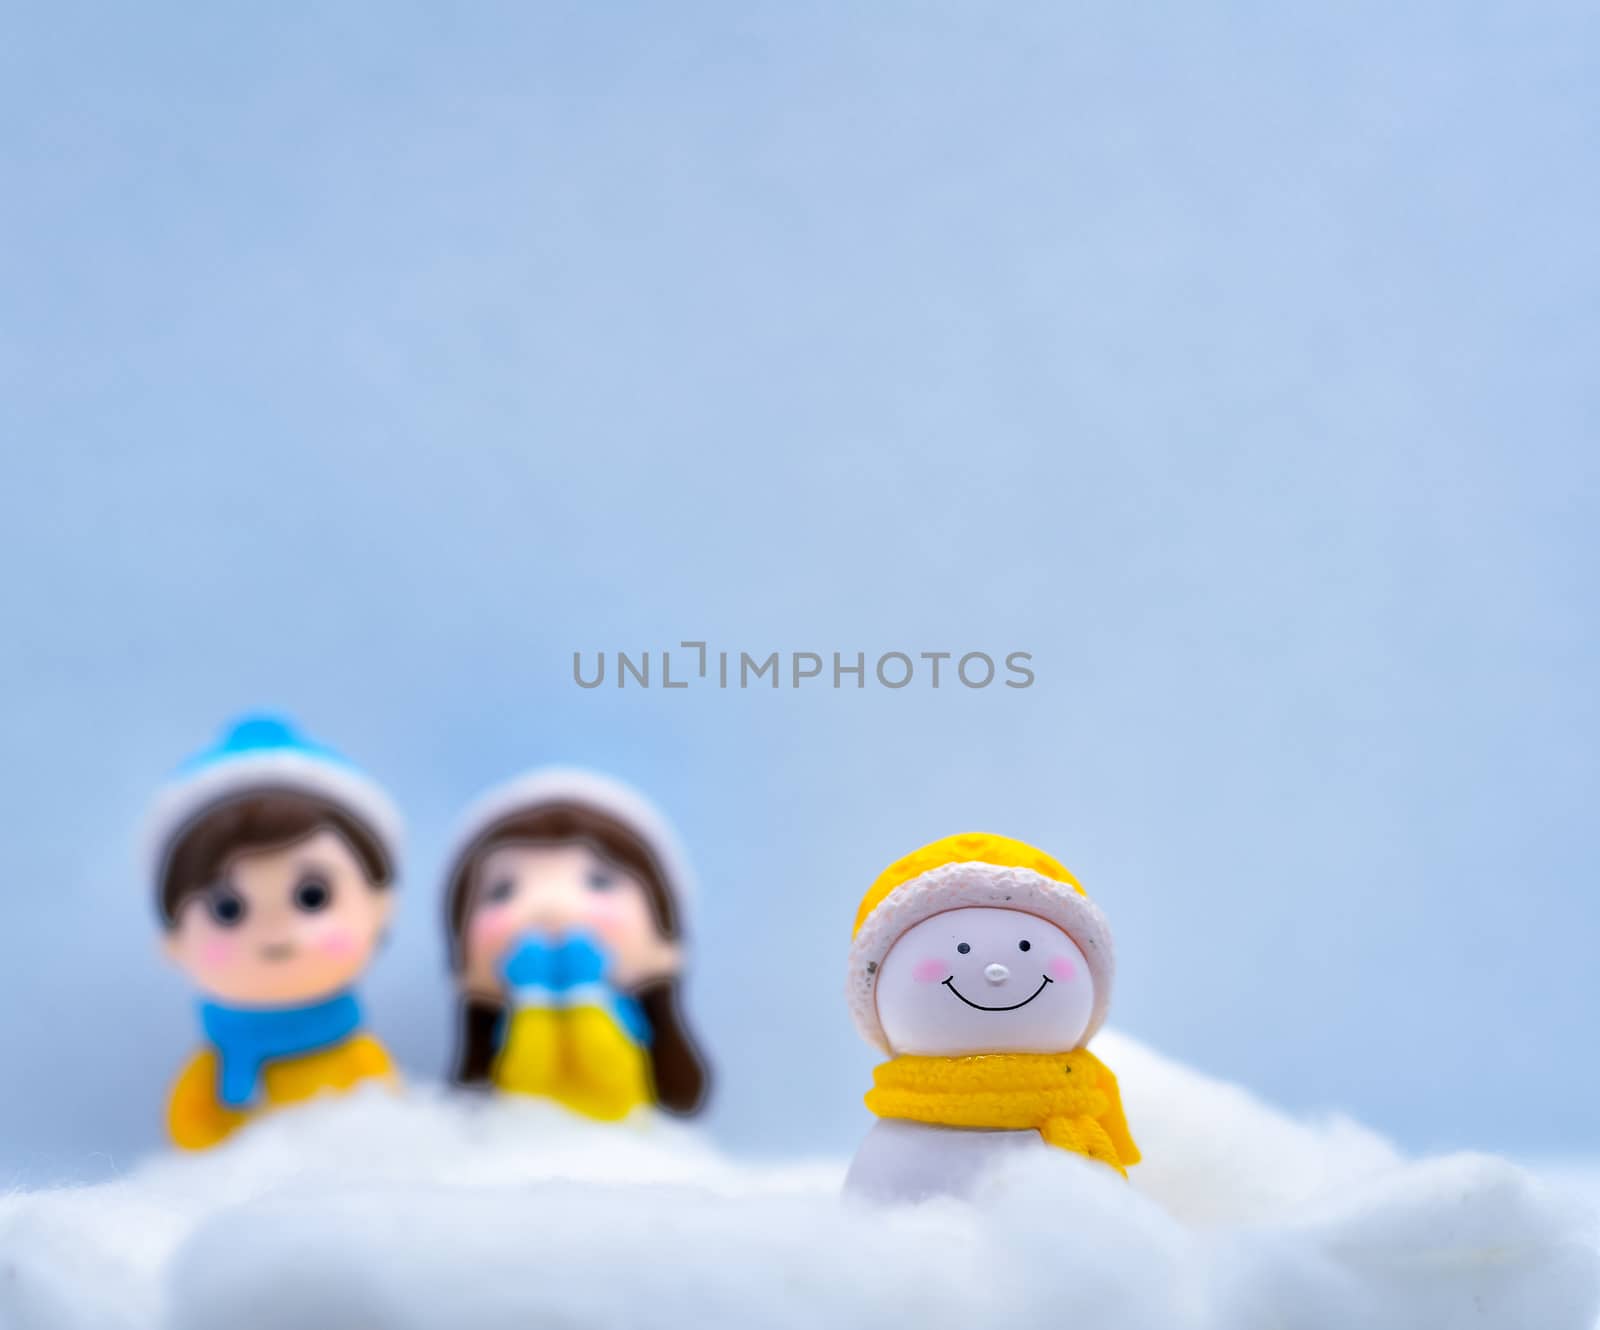 Tourism and travel concept: Miniature little snowman in winter snow with couple in the background